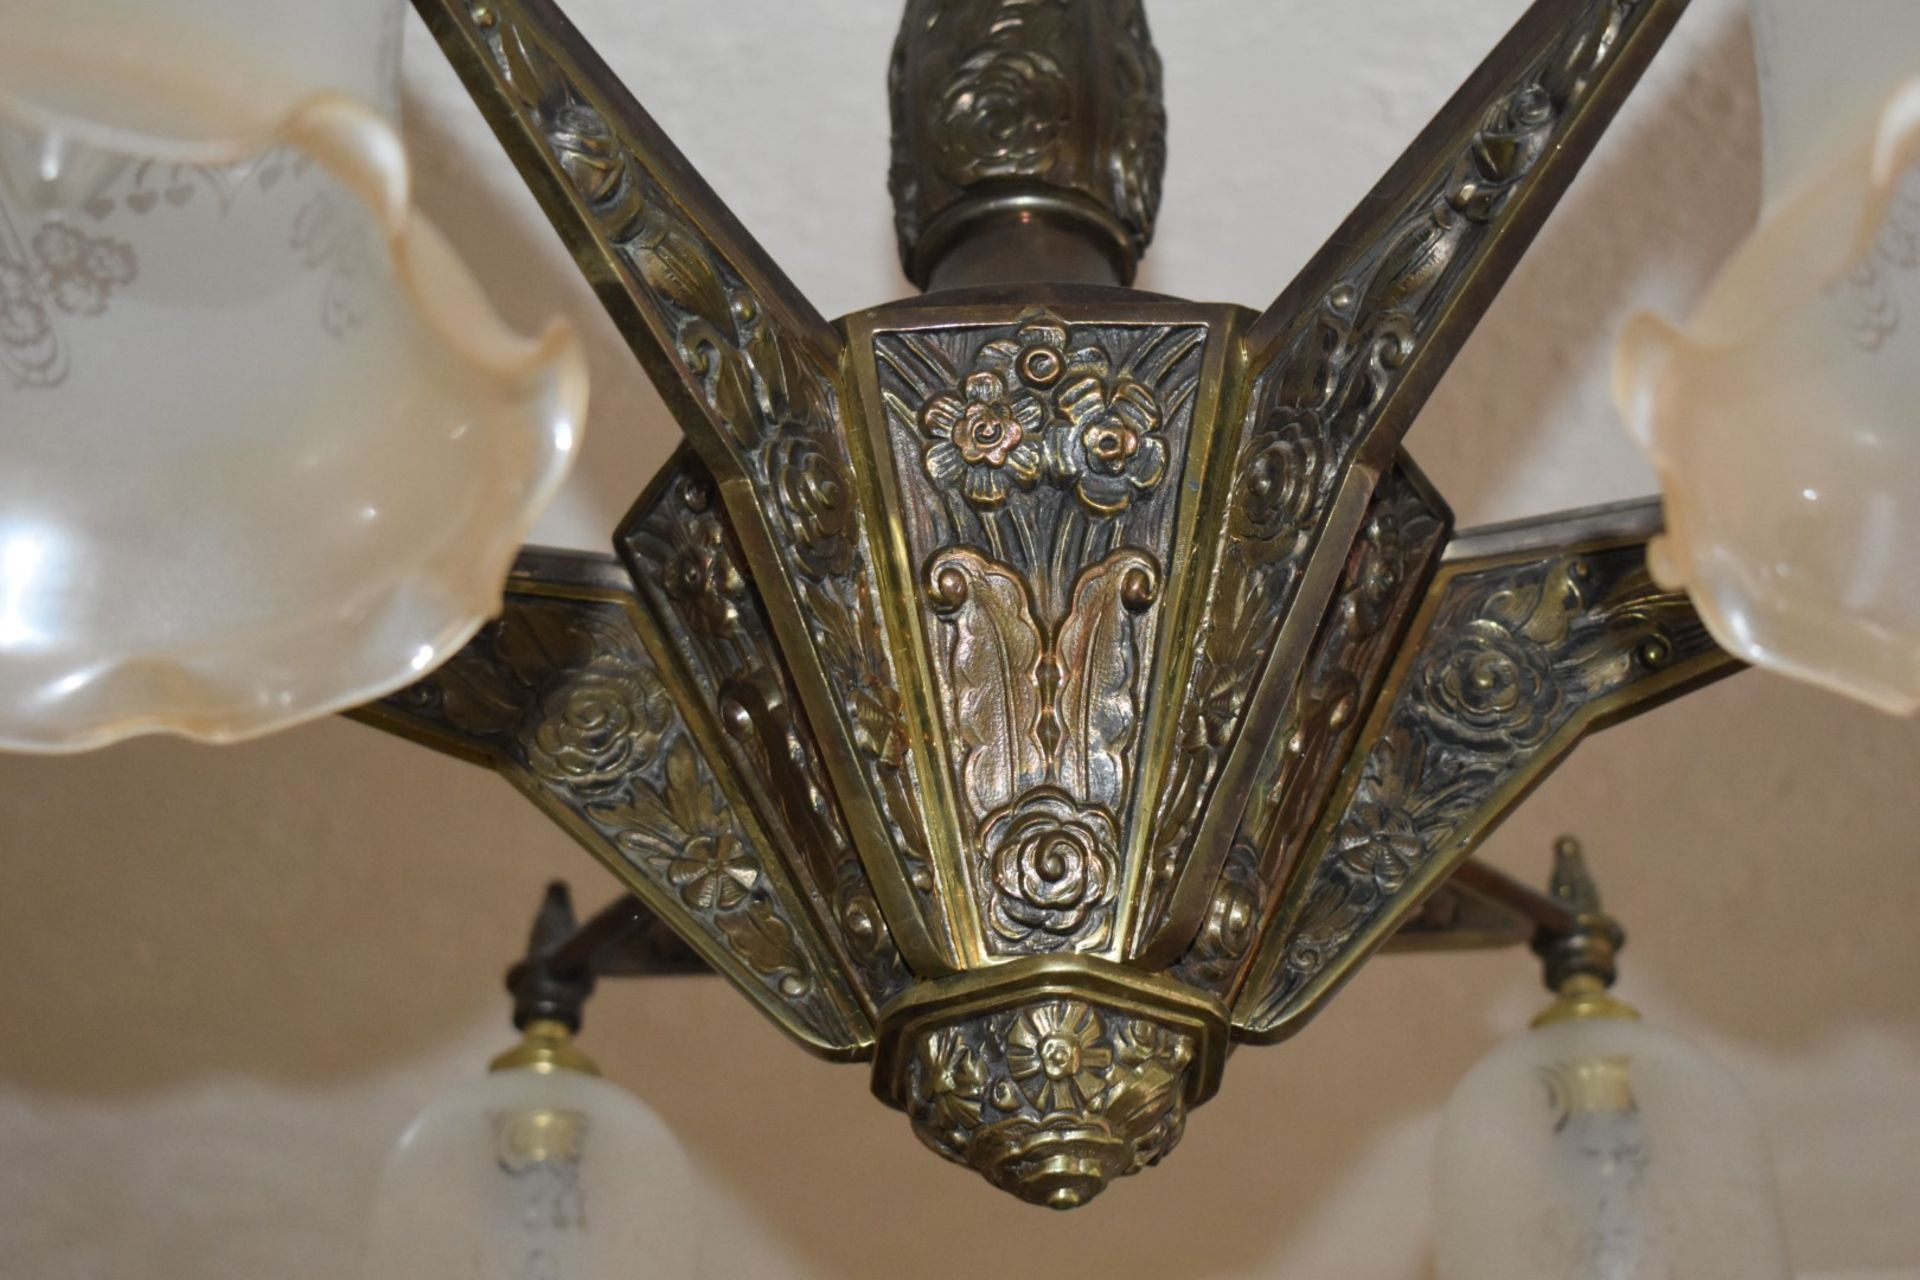 1 x Vintage 6 Light Bronze Chandelier With Frosted Glass Tulip Bell Shades - Dimensions: Drop 72 x - Image 10 of 14